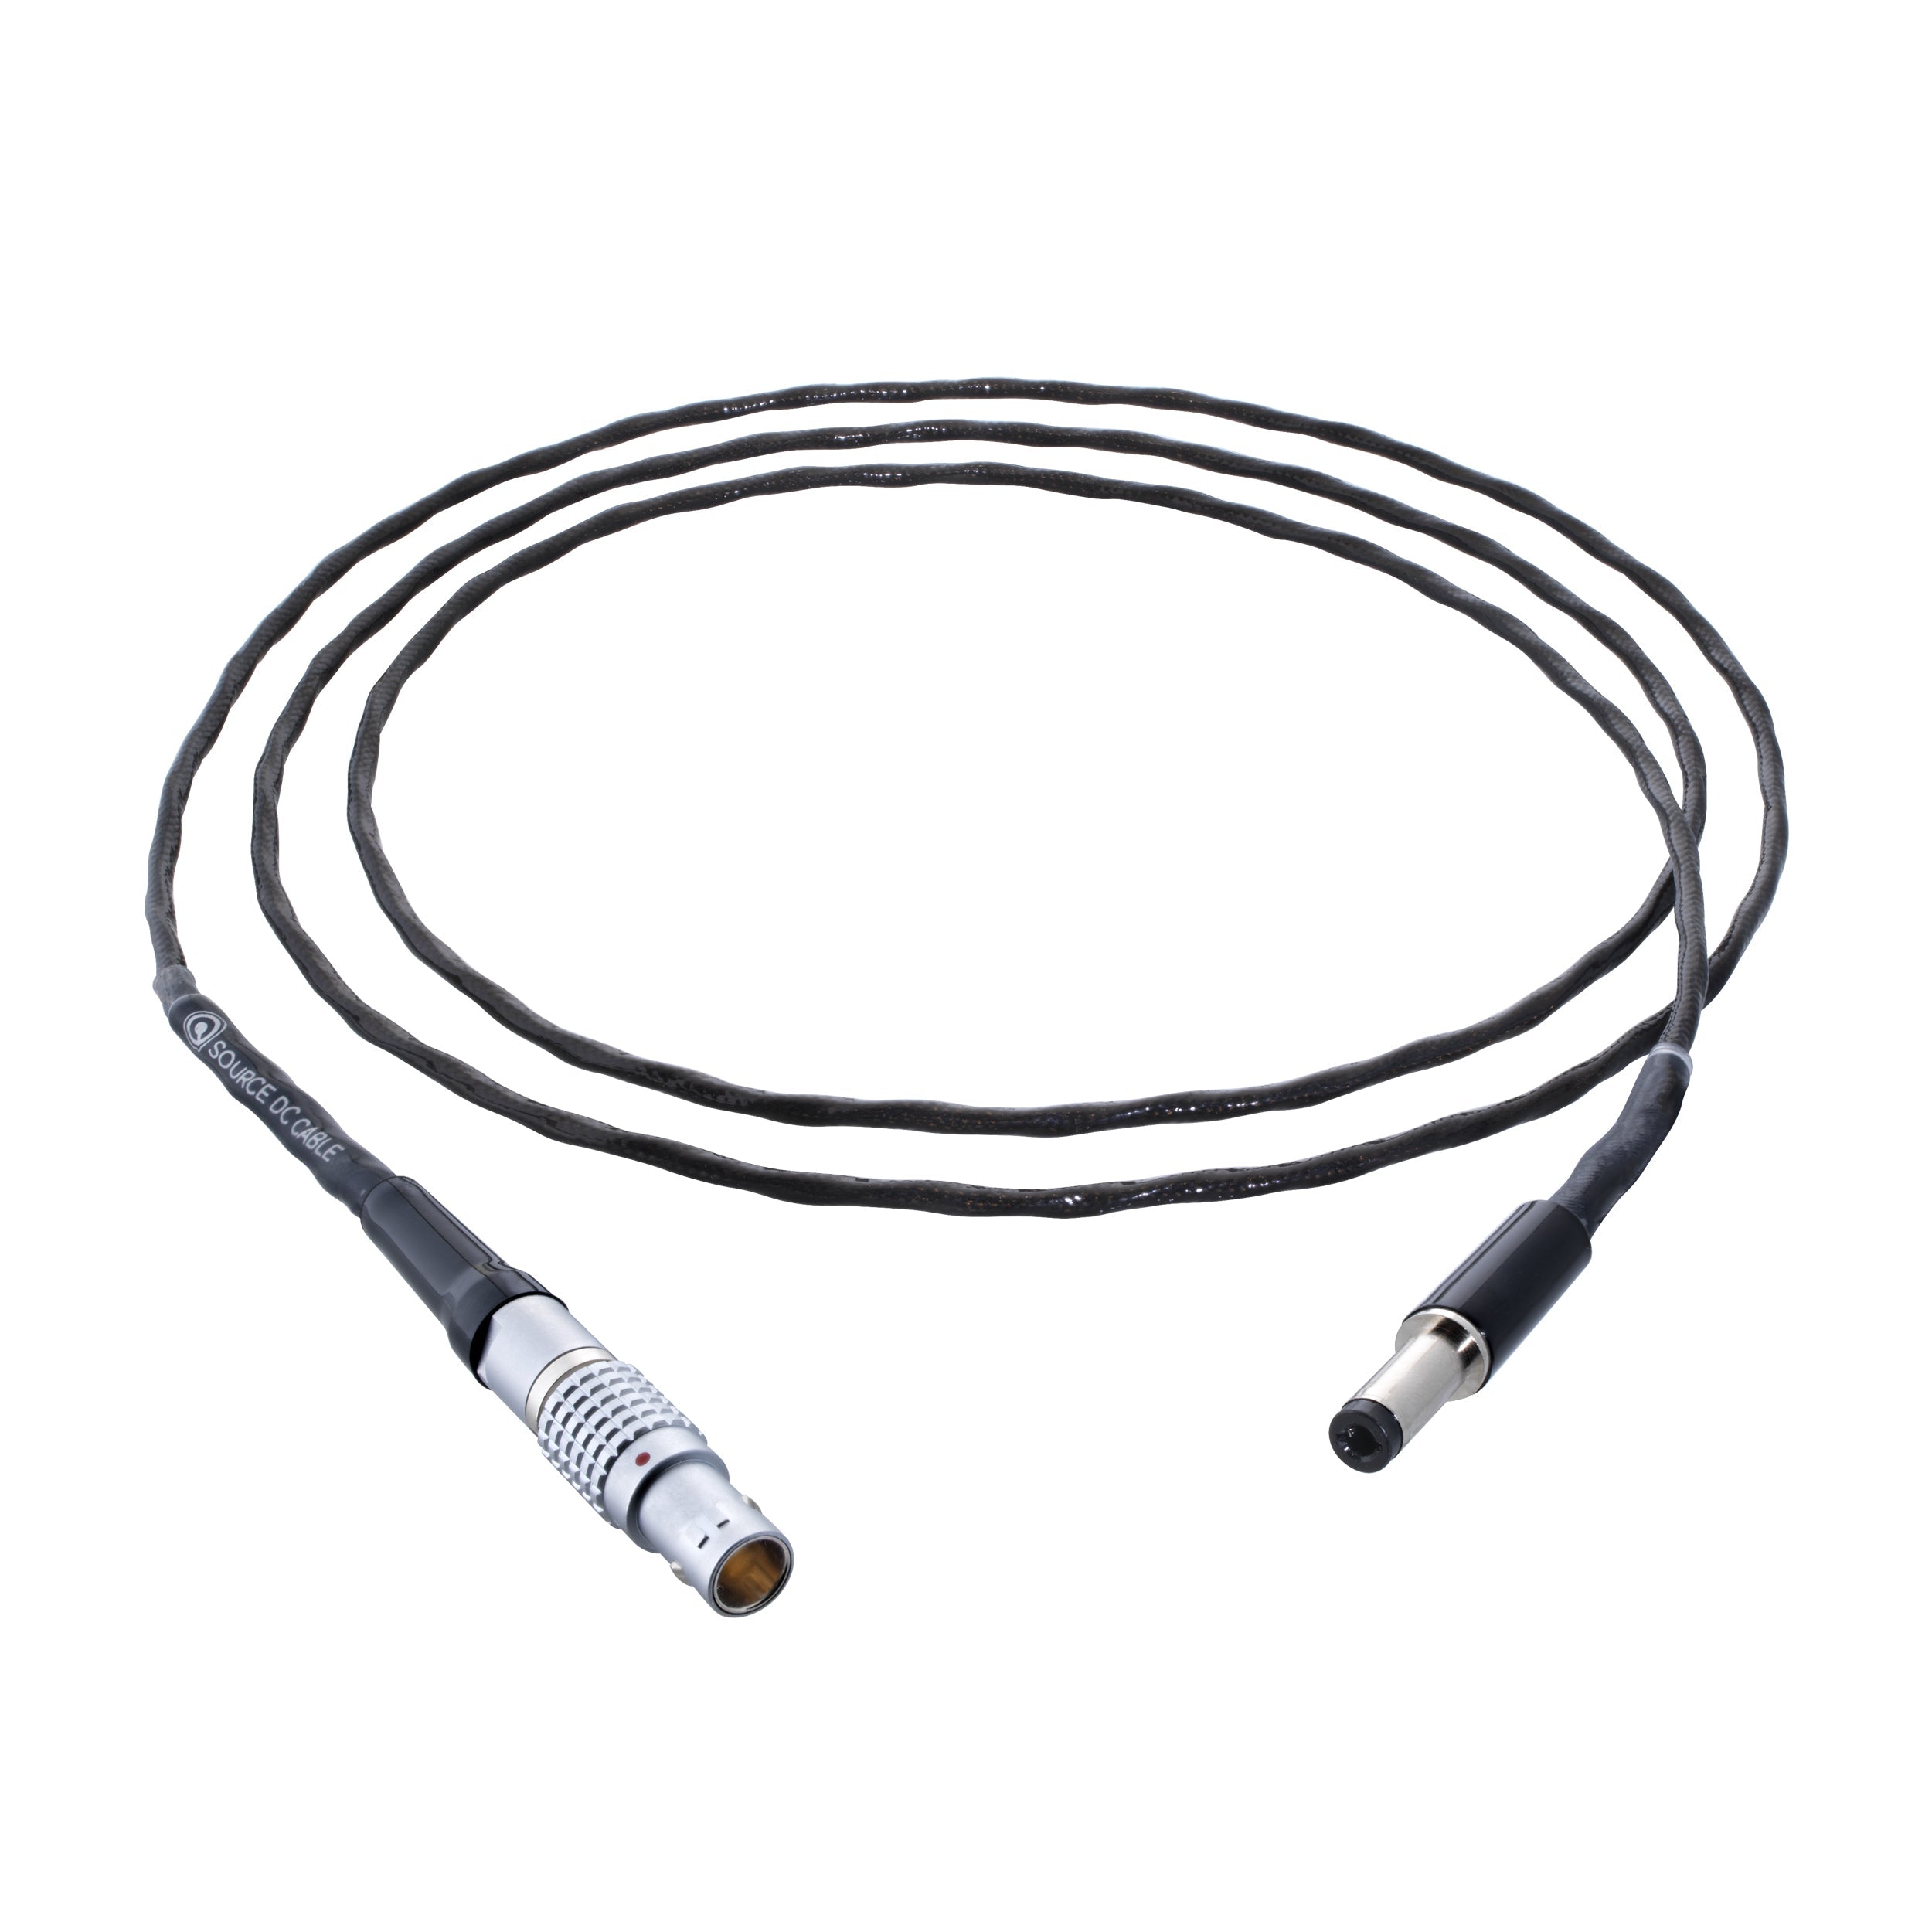 Nordost QSOURCE DC Cable - B Stock